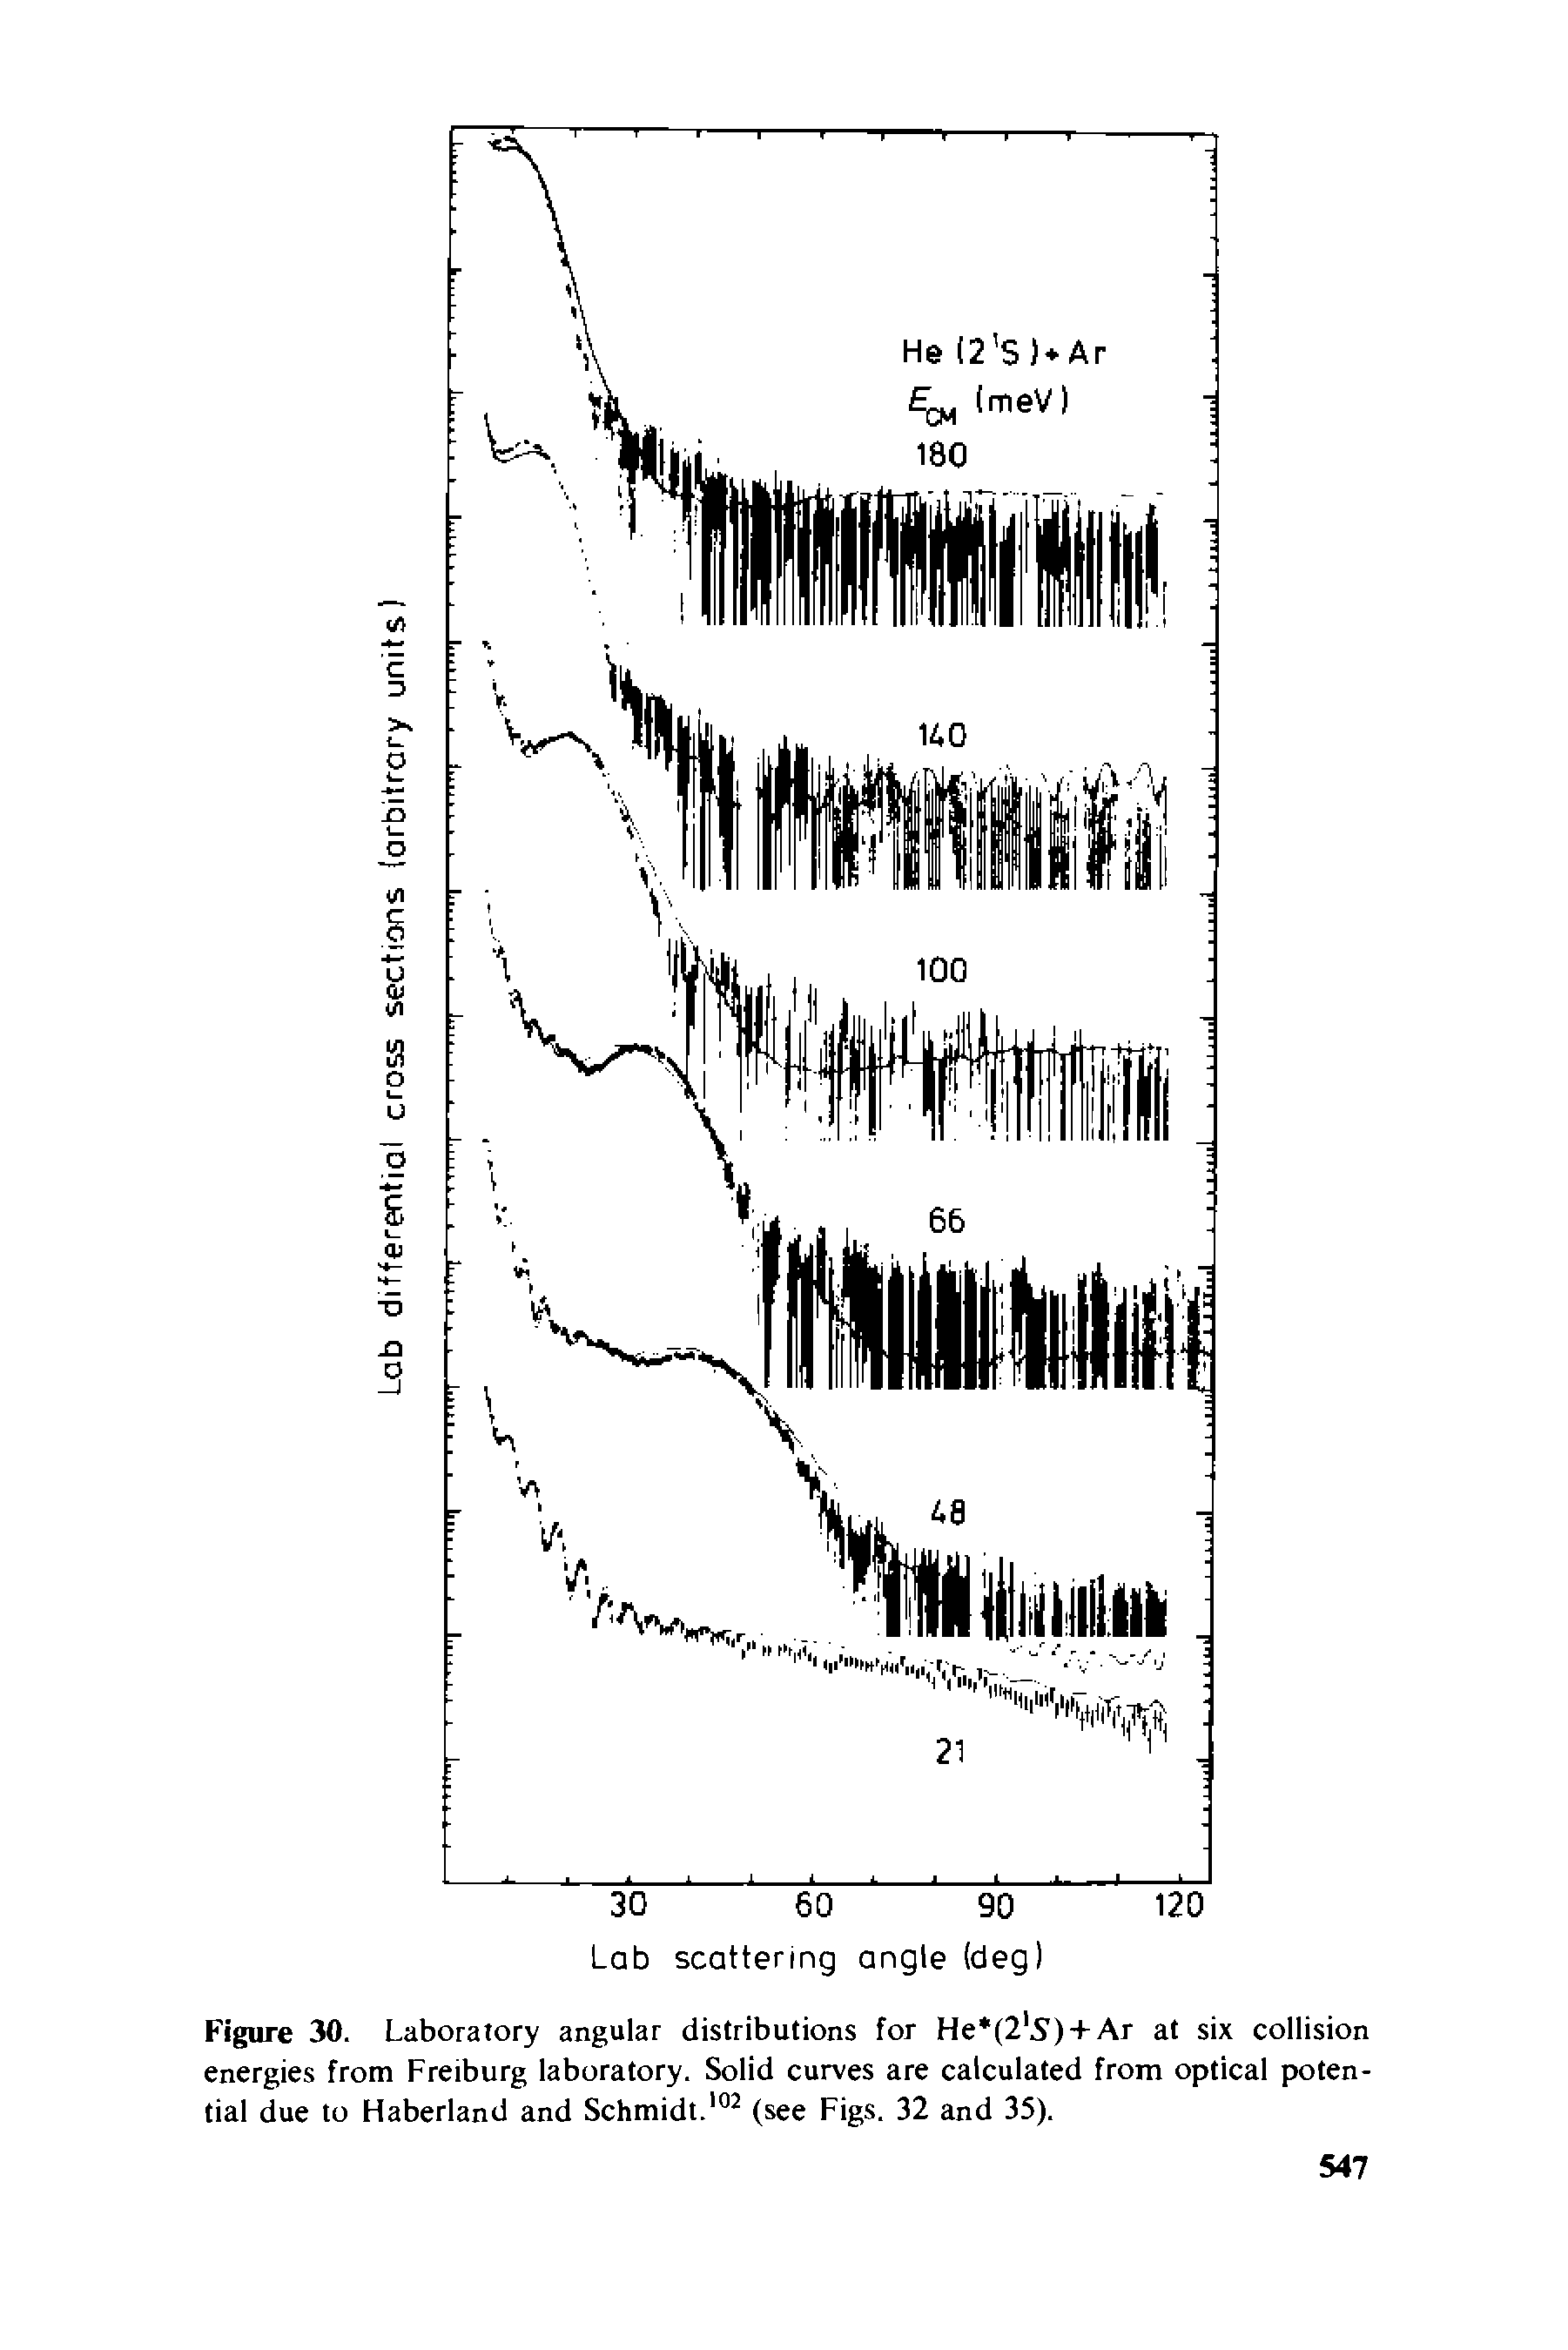 Figure 30. Laboratory angular distributions for He (2 5) + Ar at six collision energies from Freiburg laboratory. Solid curves are calculated from optical potential due to Haberland and Schmidt.102 (see Figs. 32 and 35).